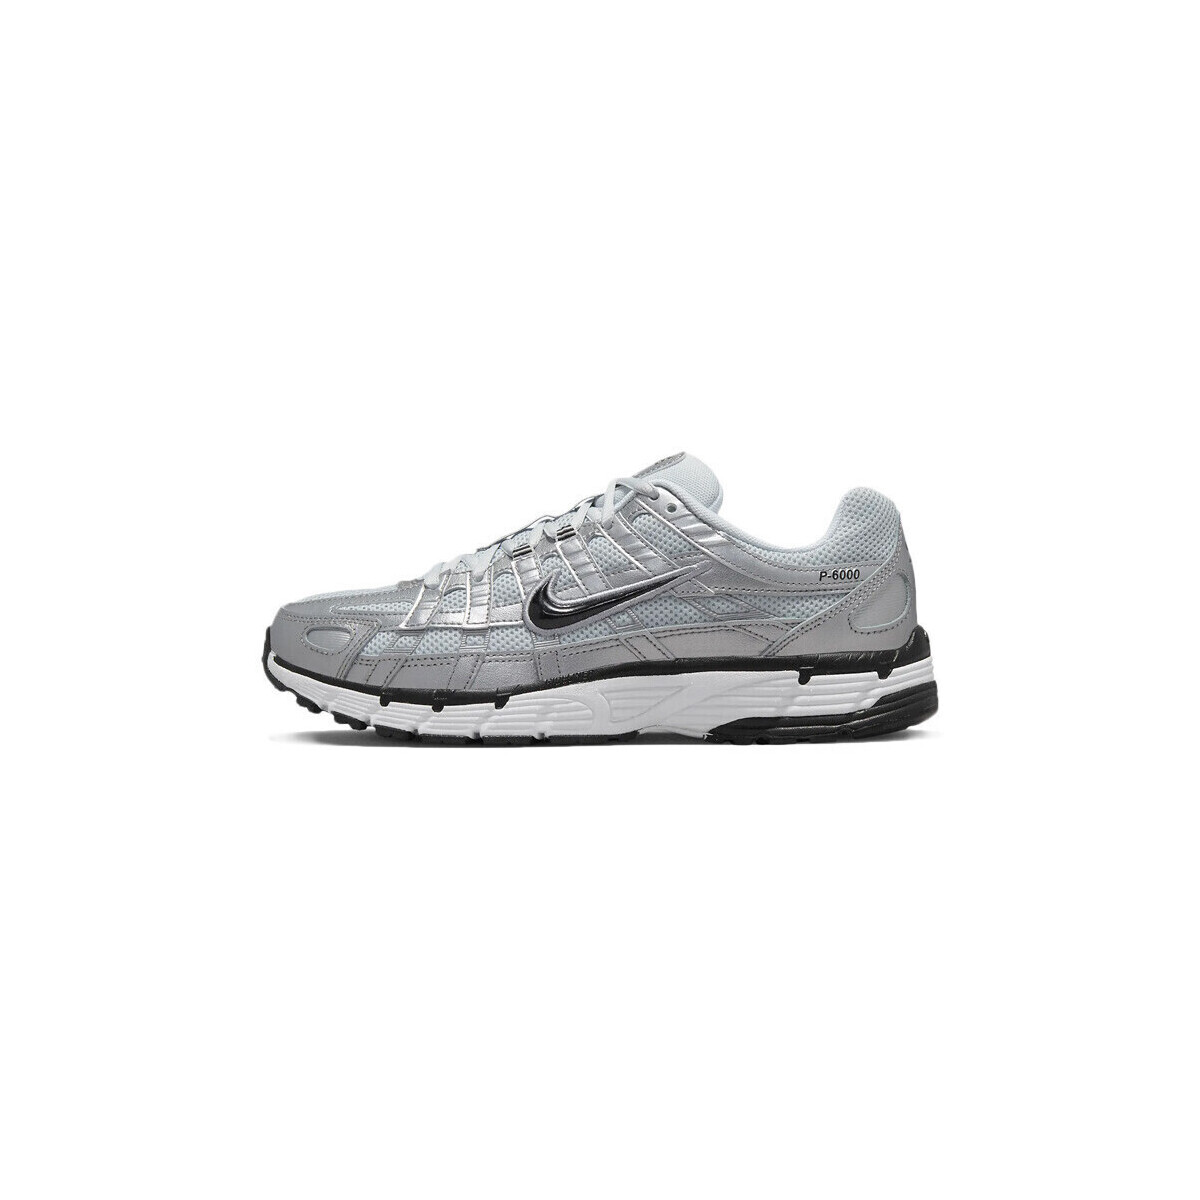 Chaussures nike coral and gray sneaker size guide 2016 WMS P-6000 Multicolore